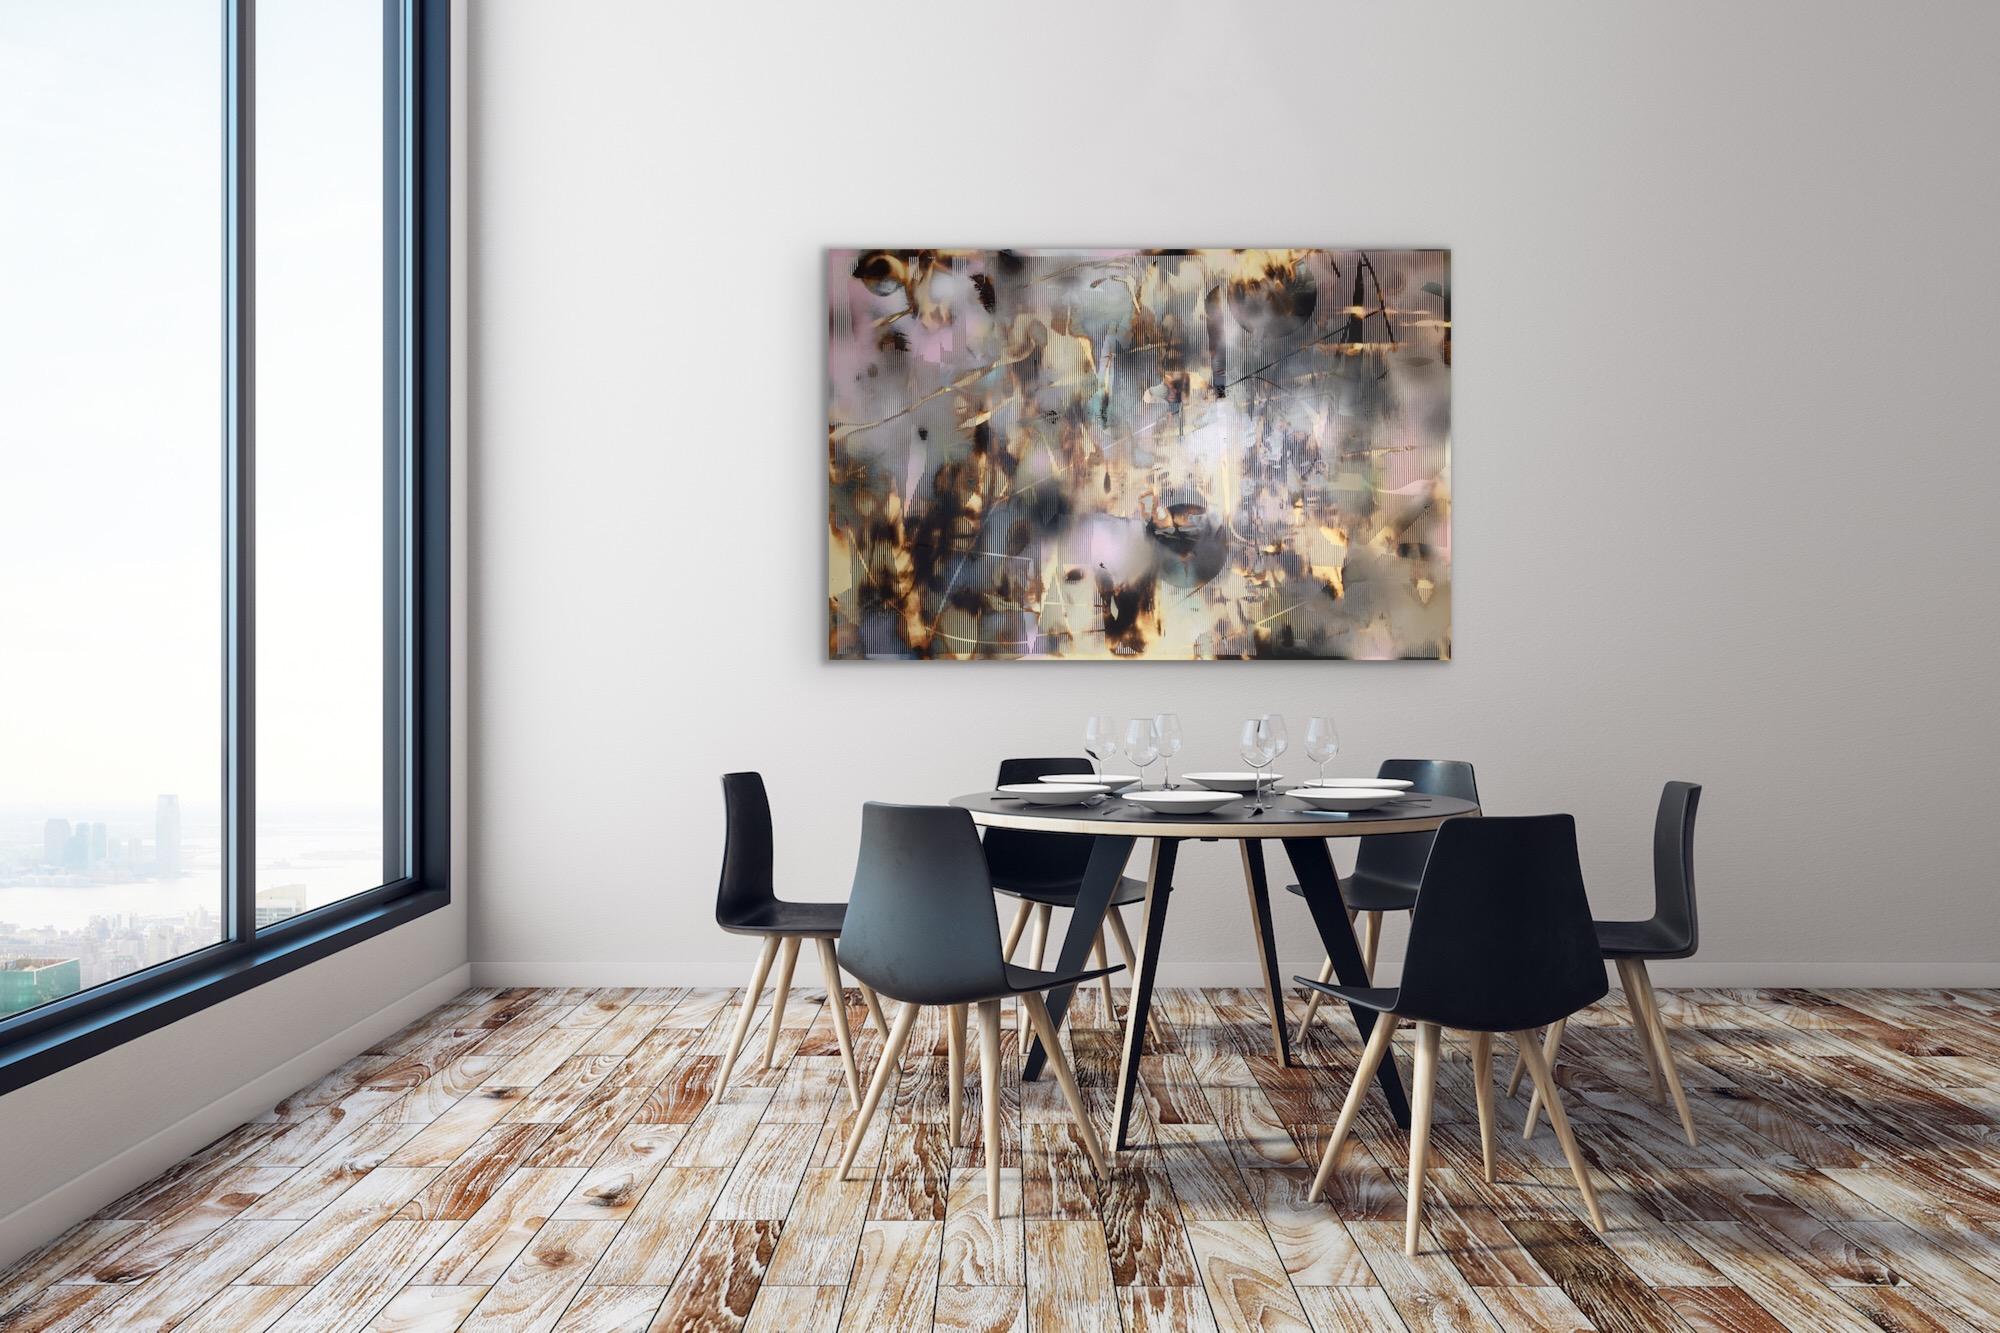 Screen tbd1 (abstract grid wood painting contemporary neutrals natural motifs) - Abstract Geometric Painting by Melisa Taylor Metzger